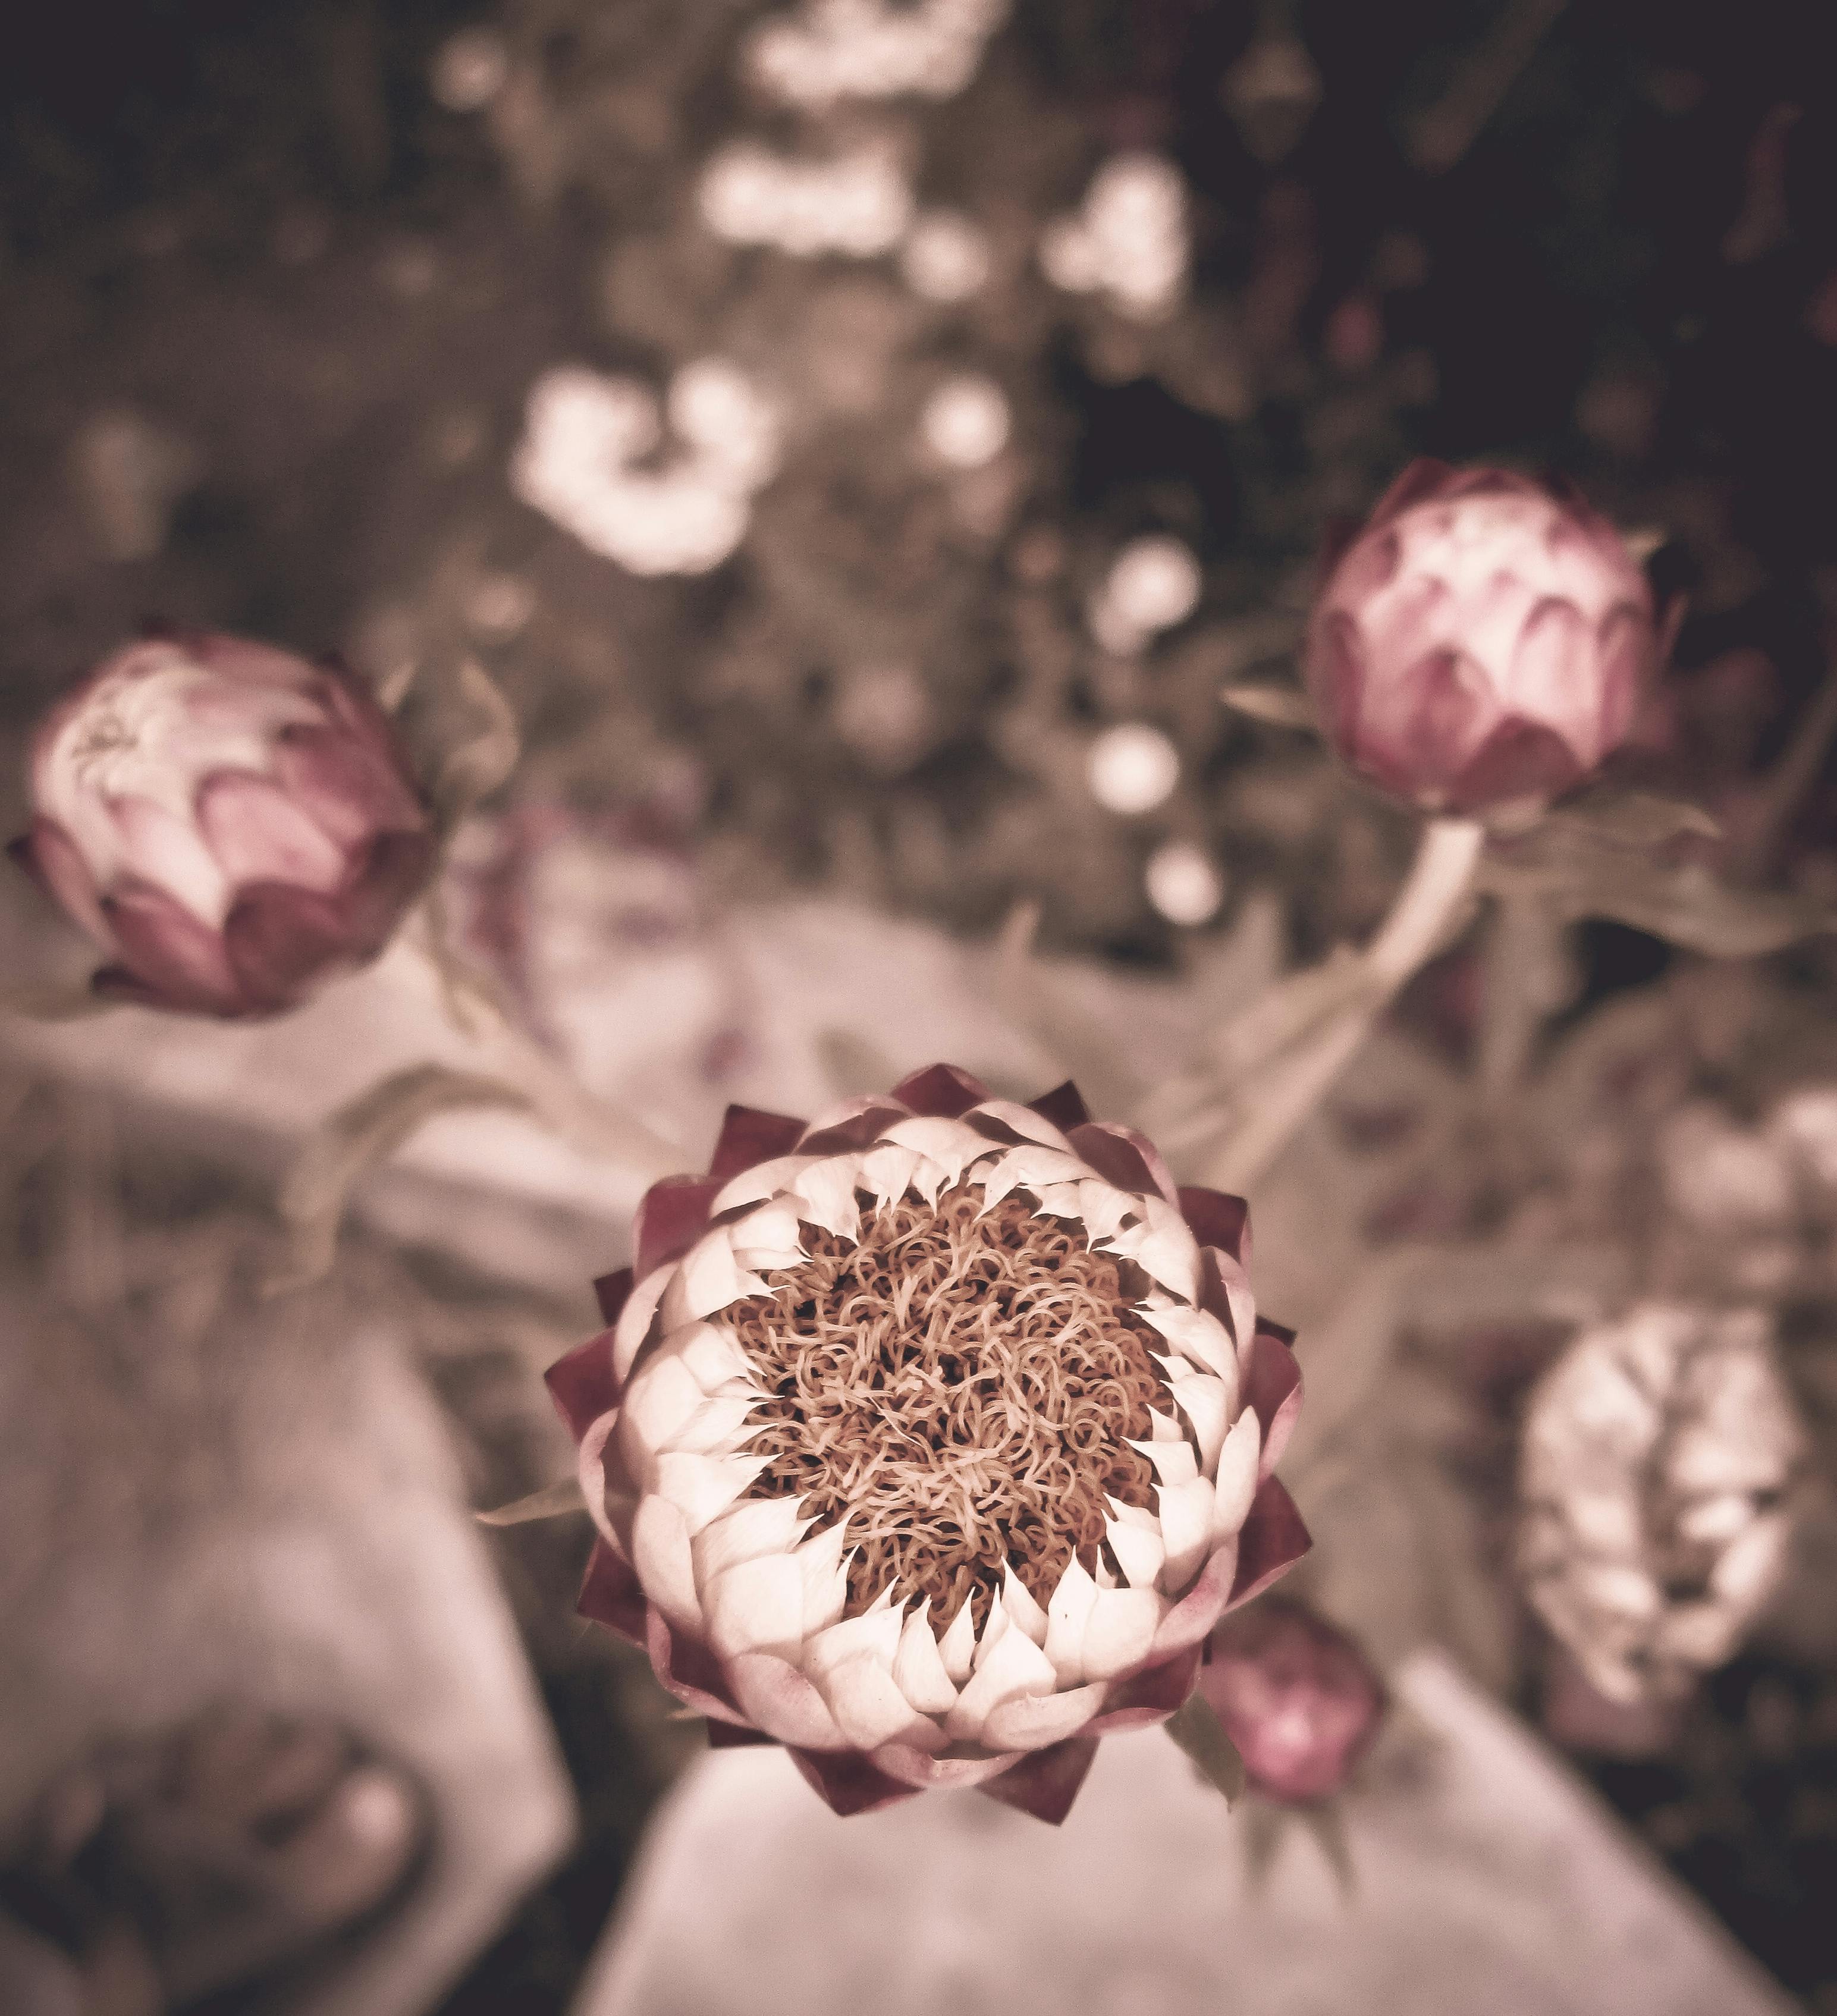 Free stock photo of android wallpaper, flower wallpaper, vintage